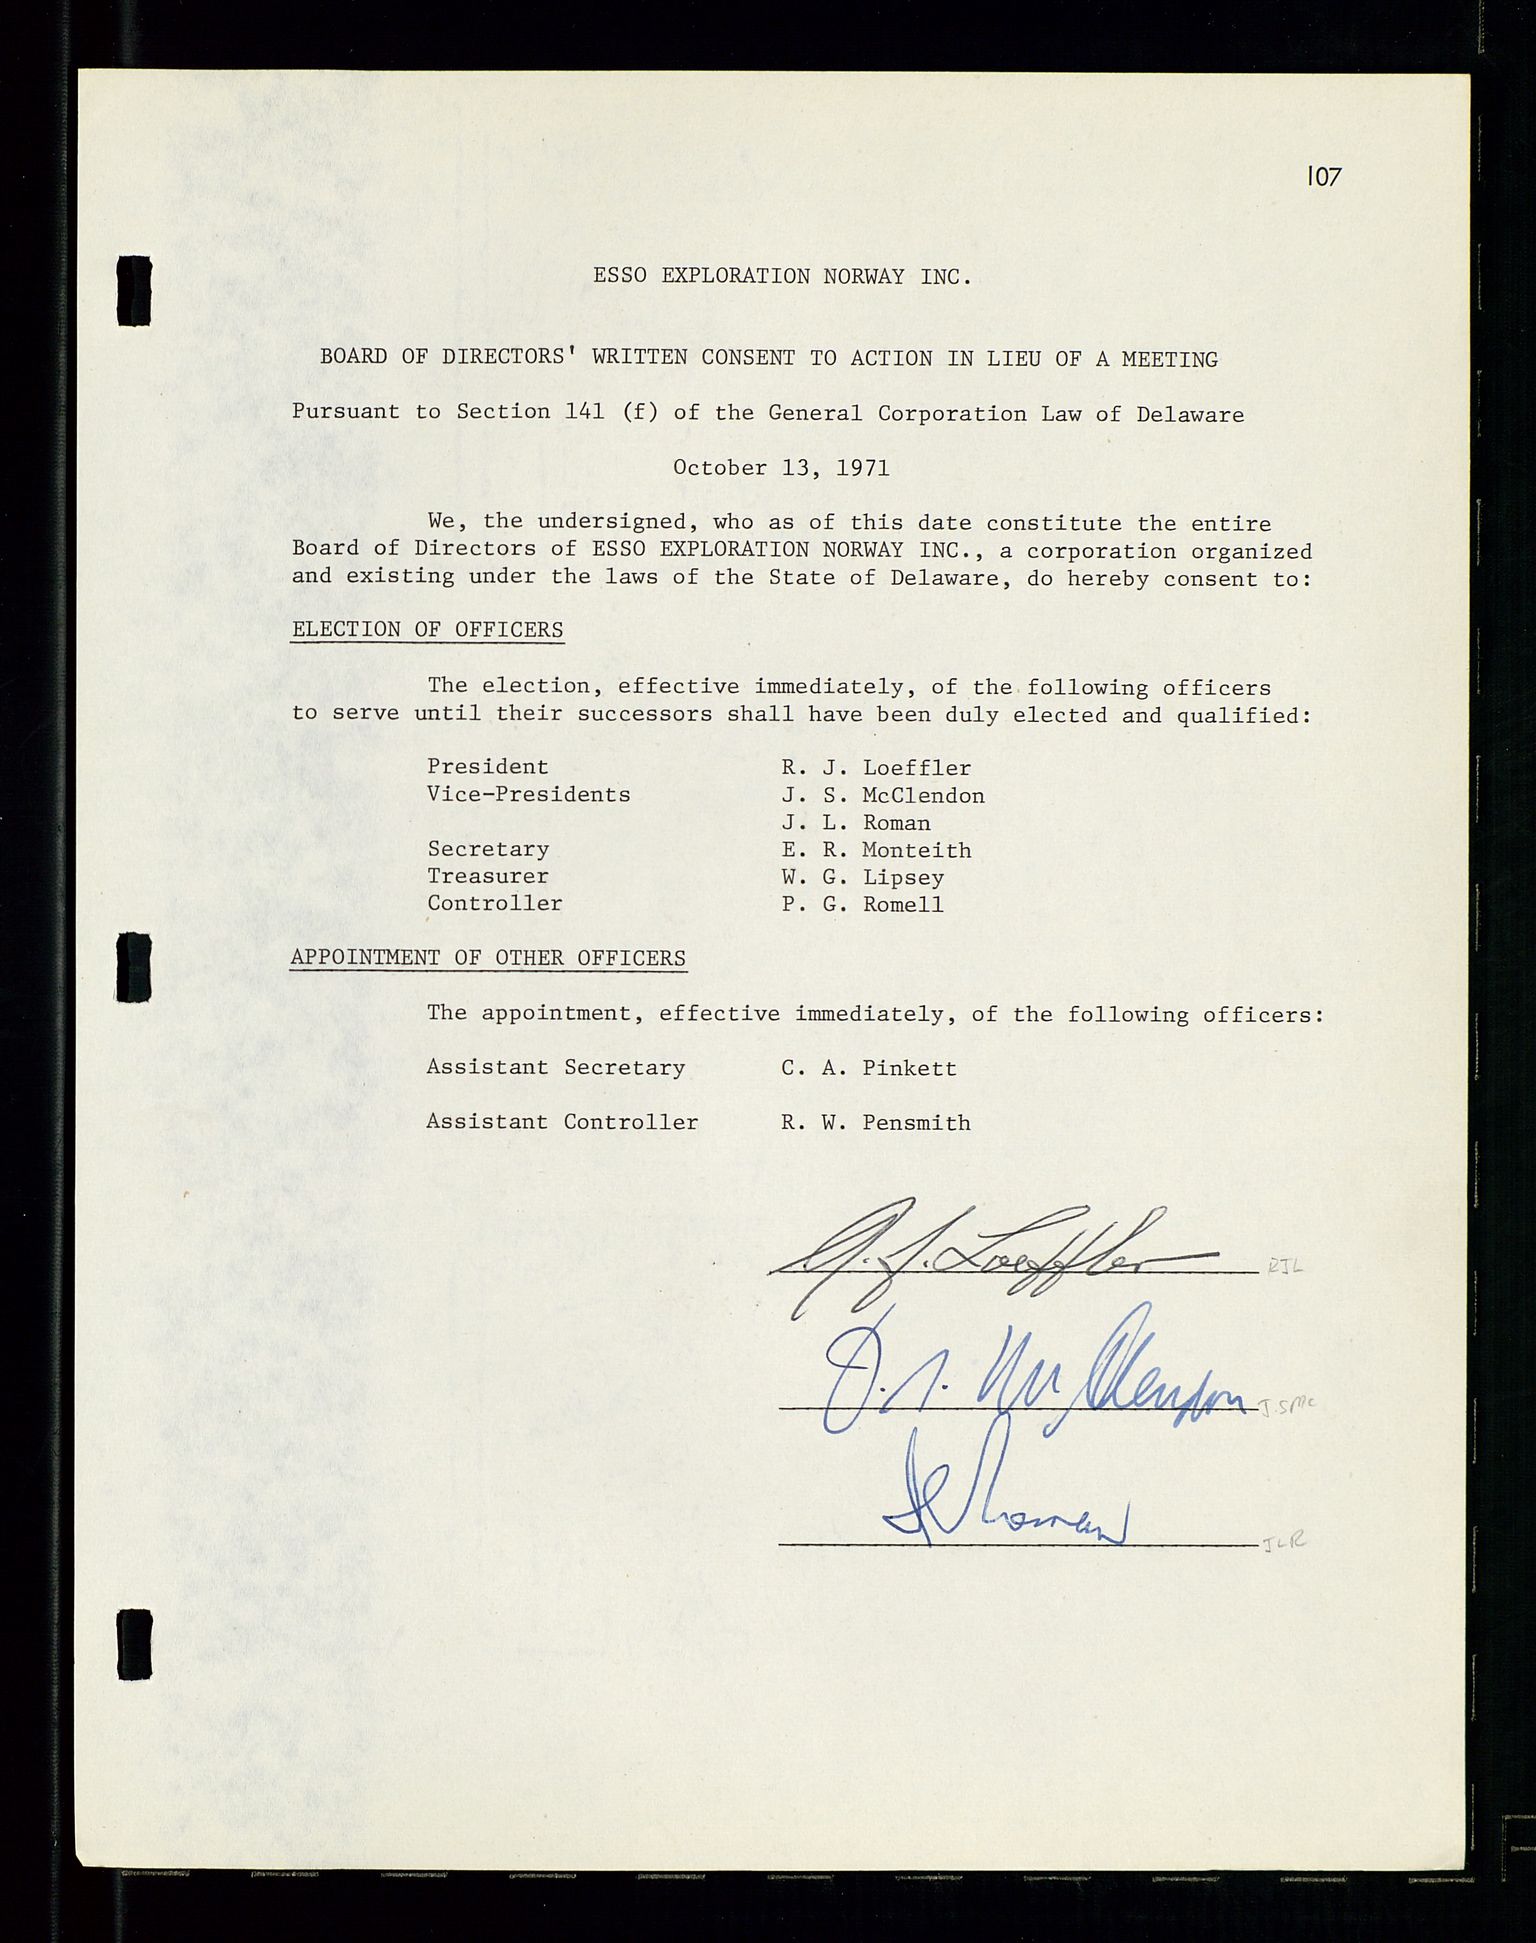 Pa 1512 - Esso Exploration and Production Norway Inc., SAST/A-101917/A/Aa/L0001/0001: Styredokumenter / Corporate records, By-Laws, Board meeting minutes, Incorporations, 1965-1975, s. 107